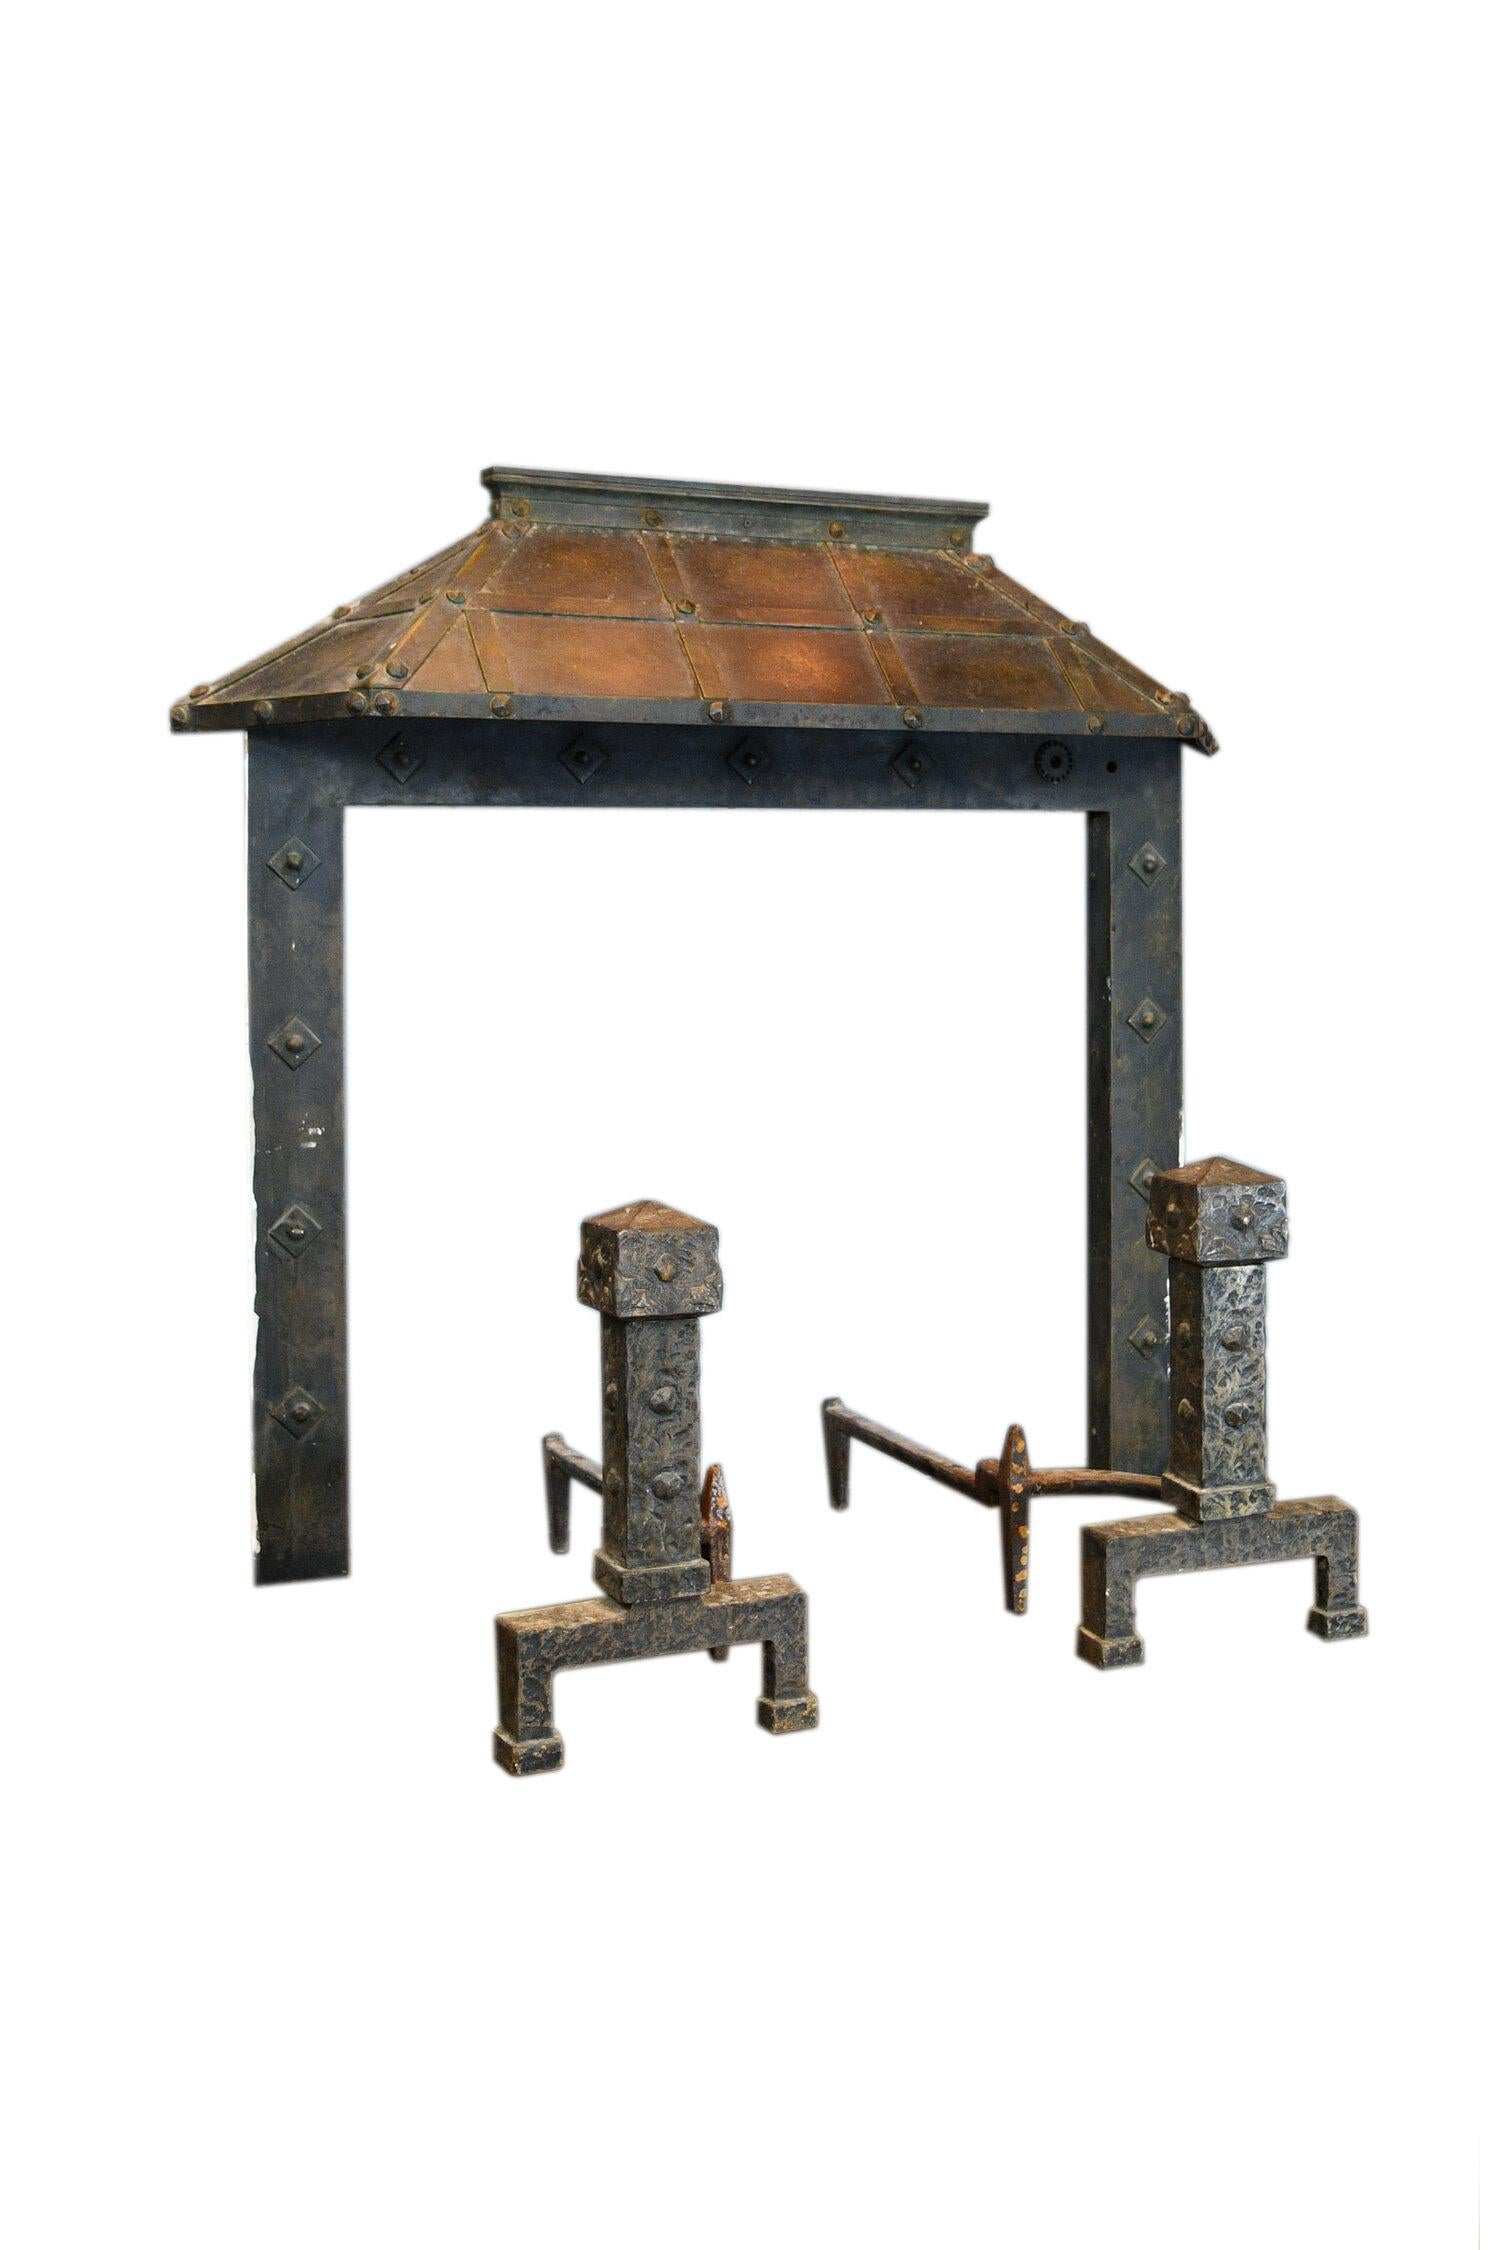 Wonderful iron fireplace set, surround, hood and andirons included. Cast into it are strips of iron and bolts with diamond rivets down the legs and on the andirons. This rustic mantel is fairly flush and would be perfect as a statement piece in a